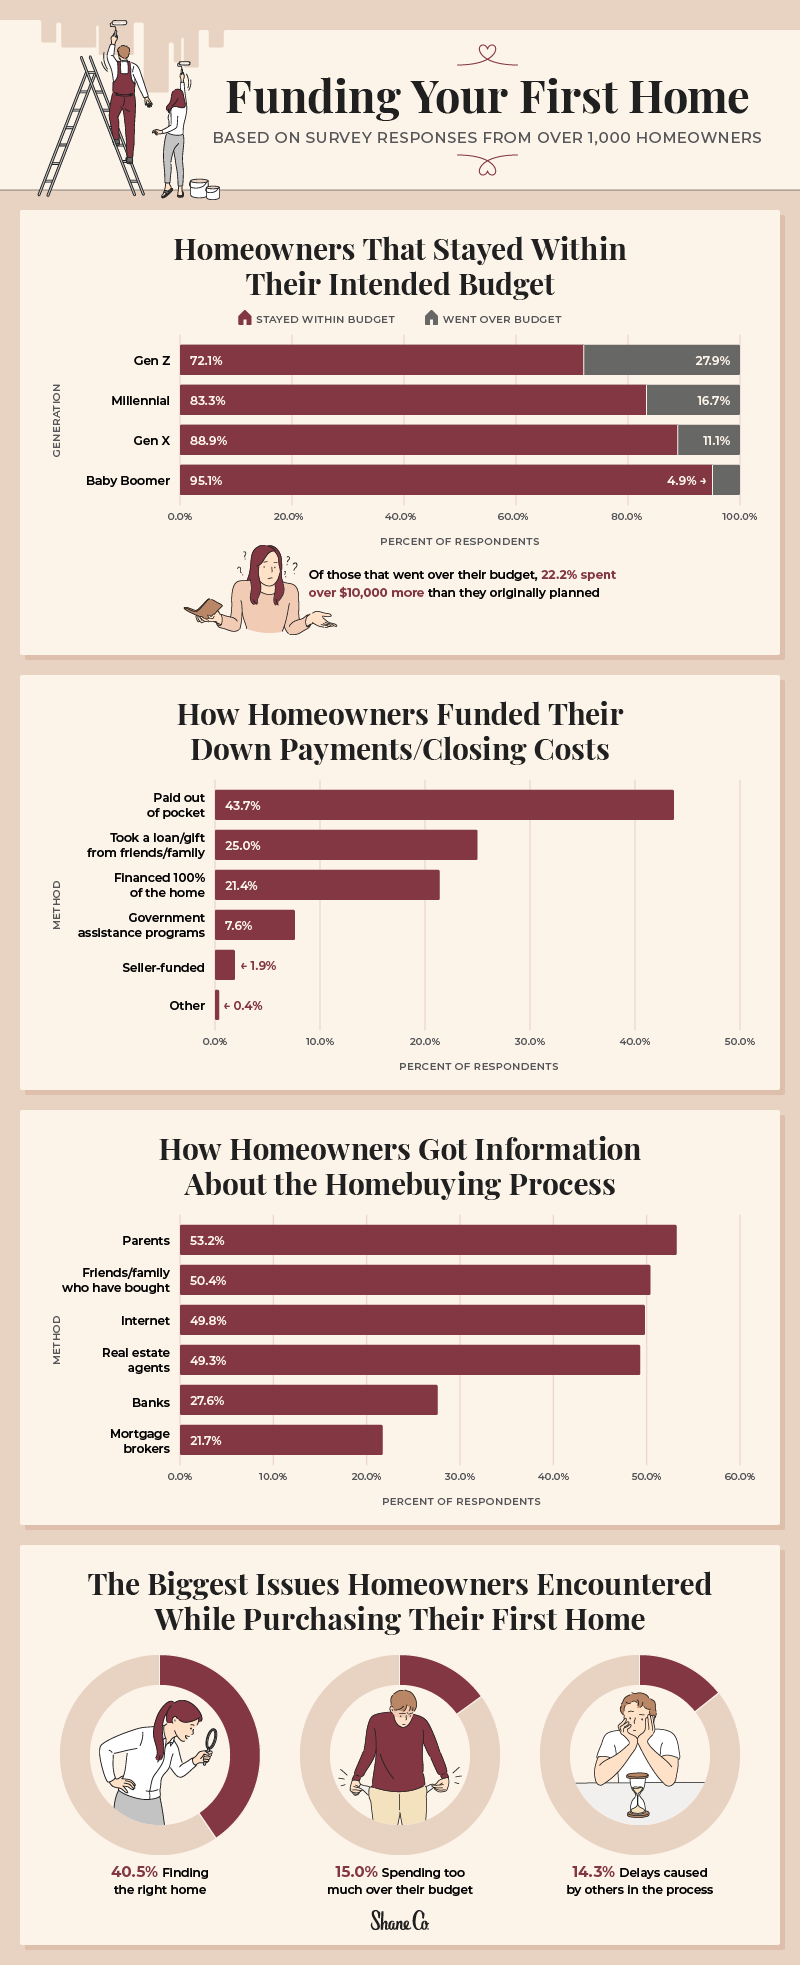 A graphic showing statistics related to how first-time homeowners financed their homes